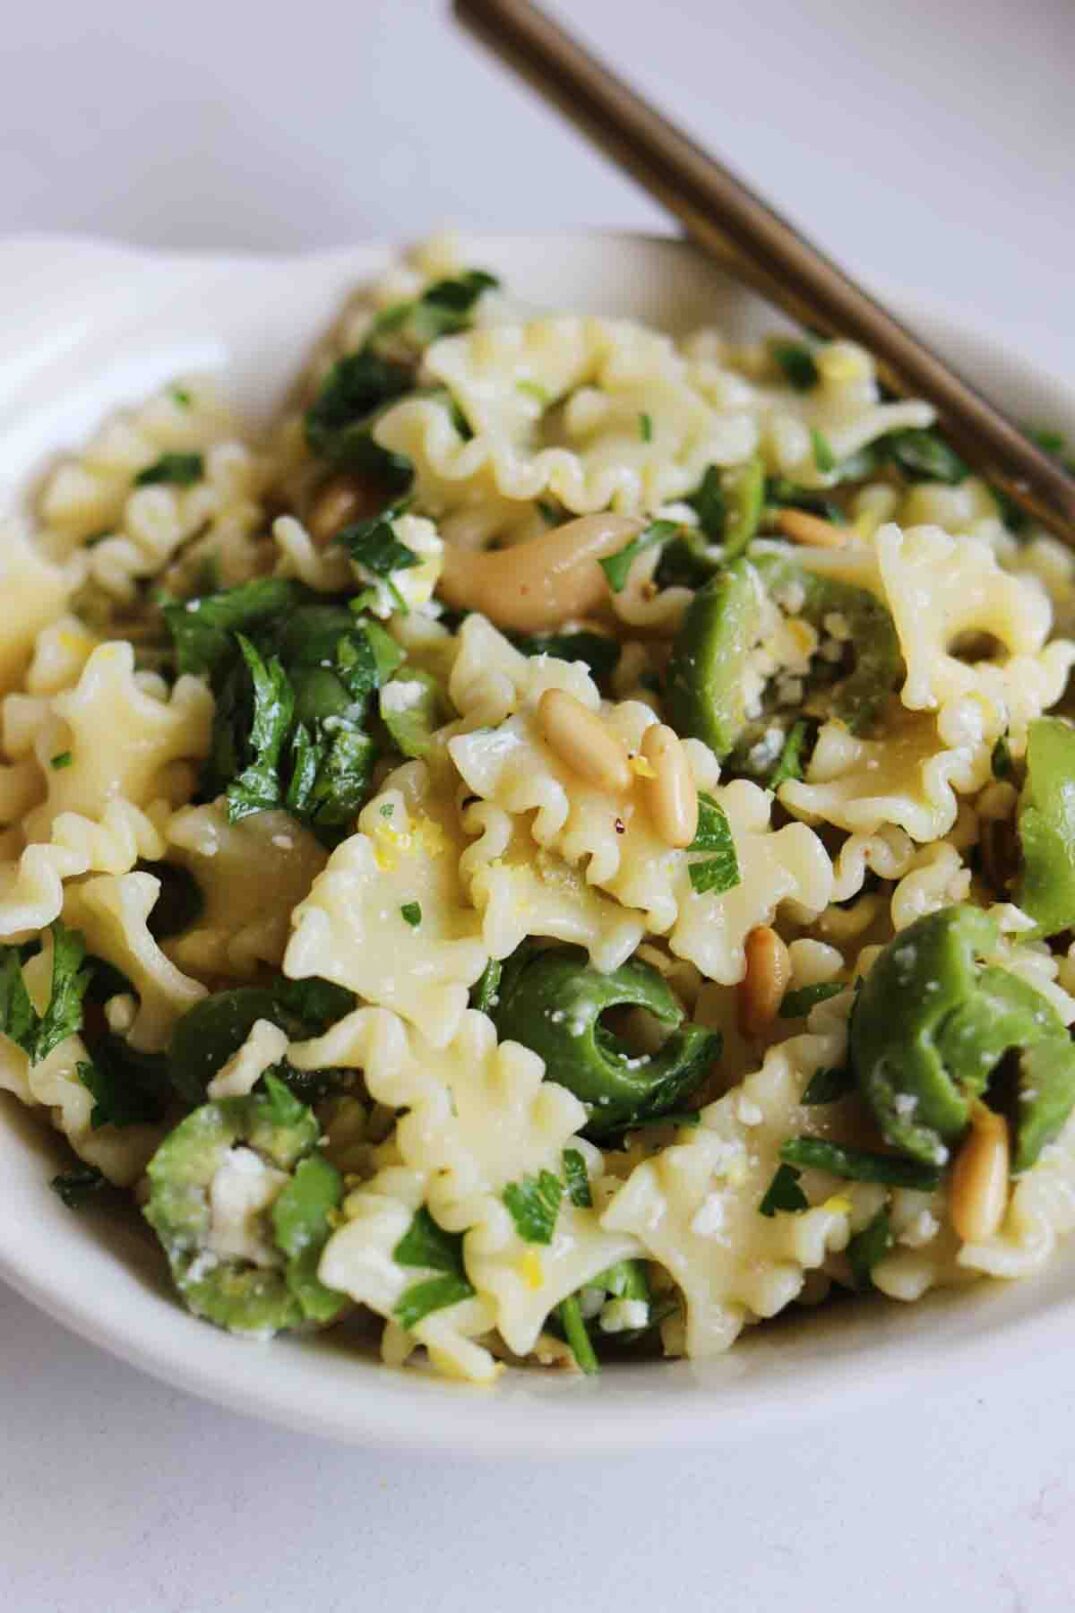 pasta, olives, parsley, pine nuts and blue cheese tossed together and scooped into a bowl.